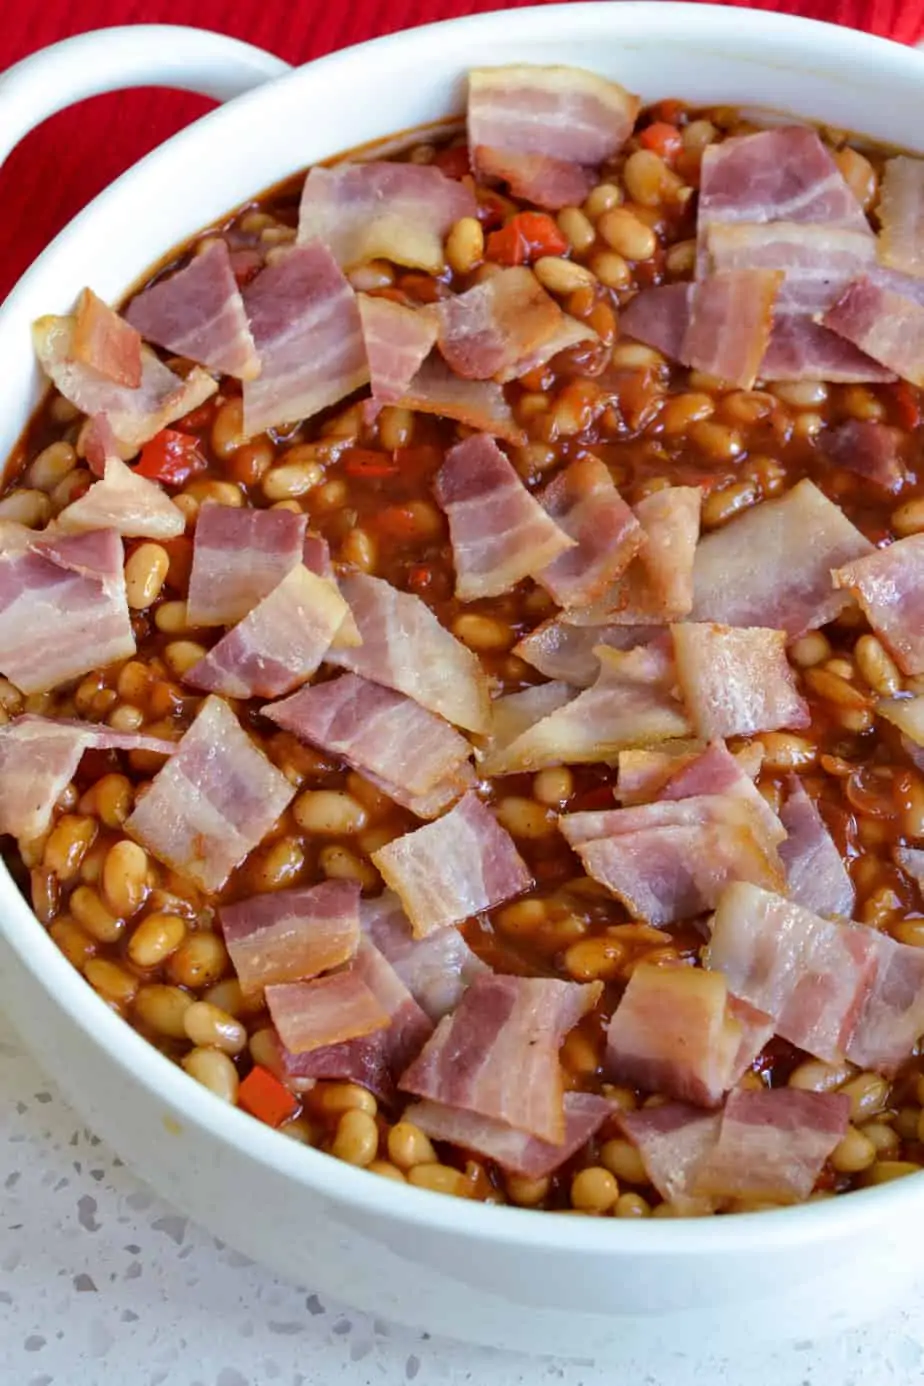  Chop the bacon into bite-size pieces and sprinkle the partially cooked bacon over the top. 